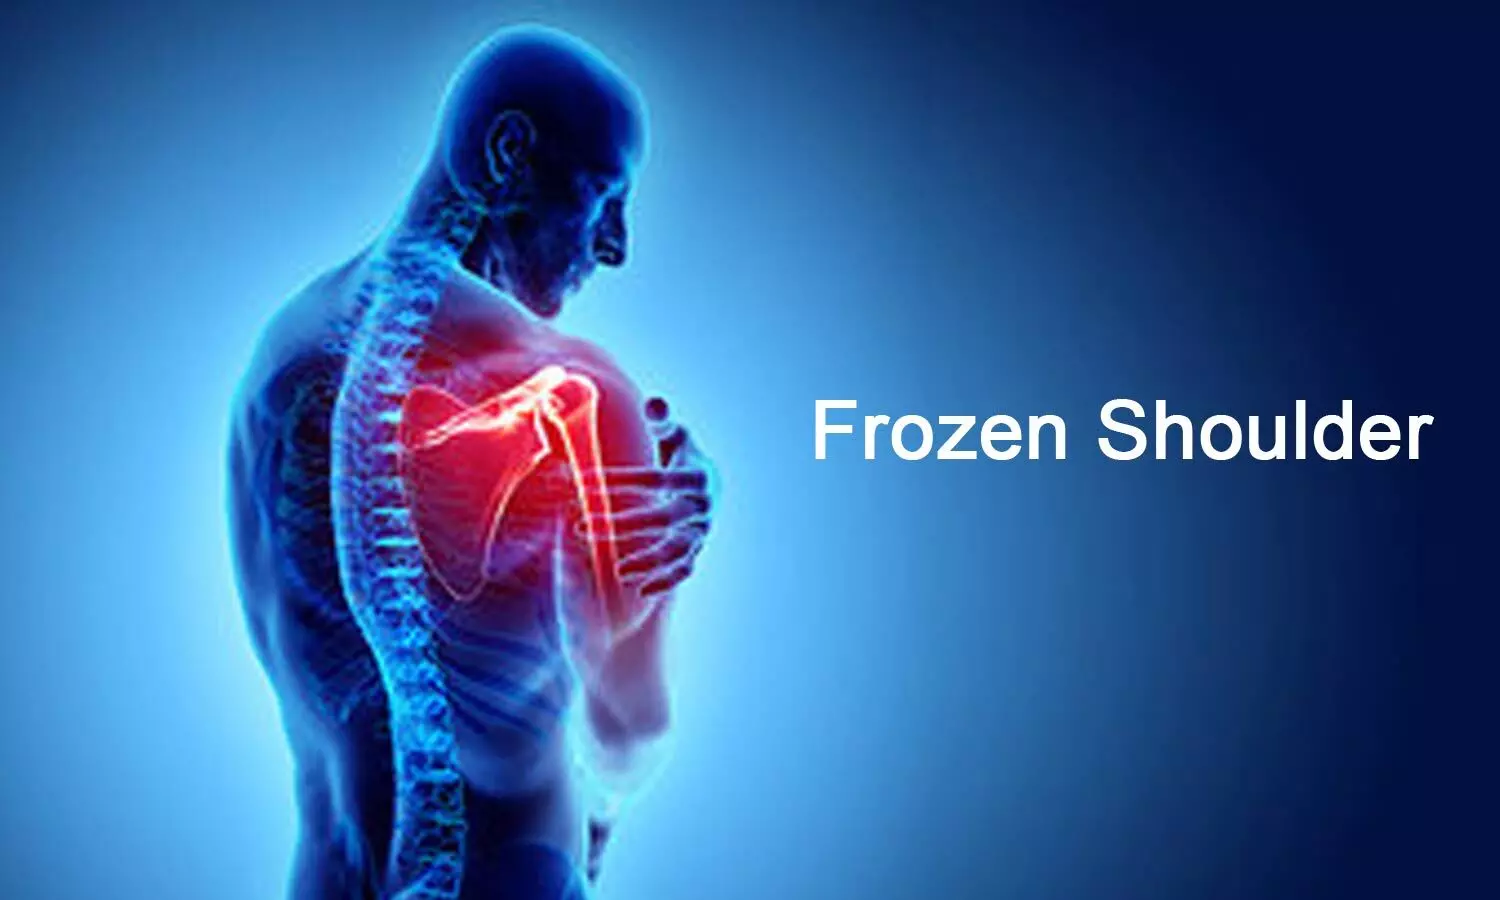 Arterial embolization may improve pain and function in frozen shoulder